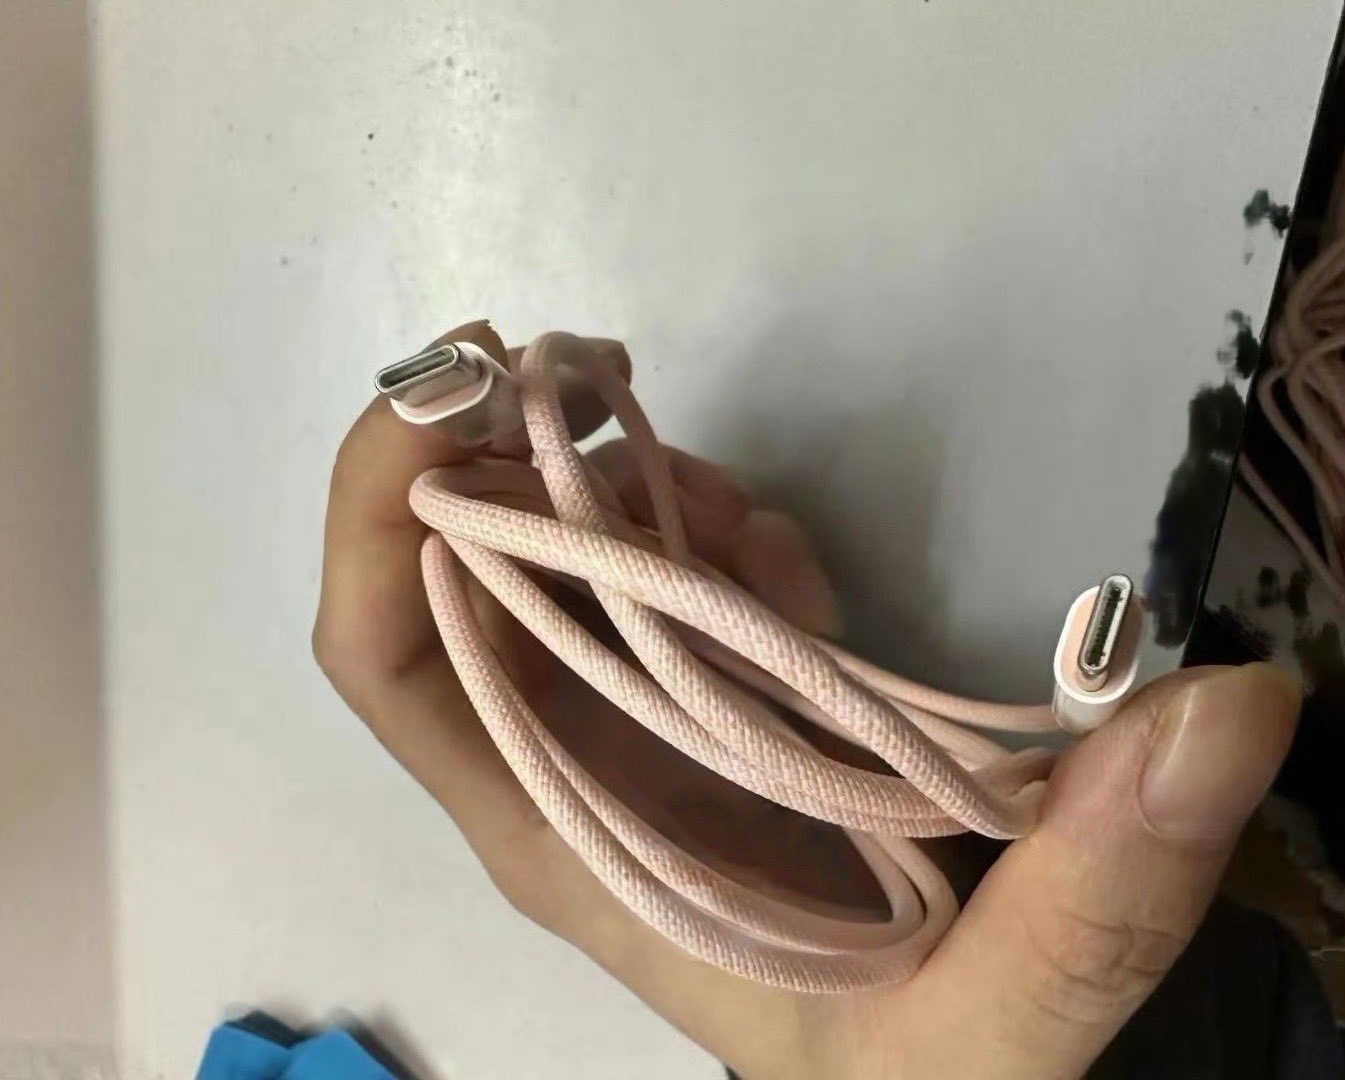 iPhone 15 And iPhone 15 Pro Could Get Color-Matched Braided USB-C Cables